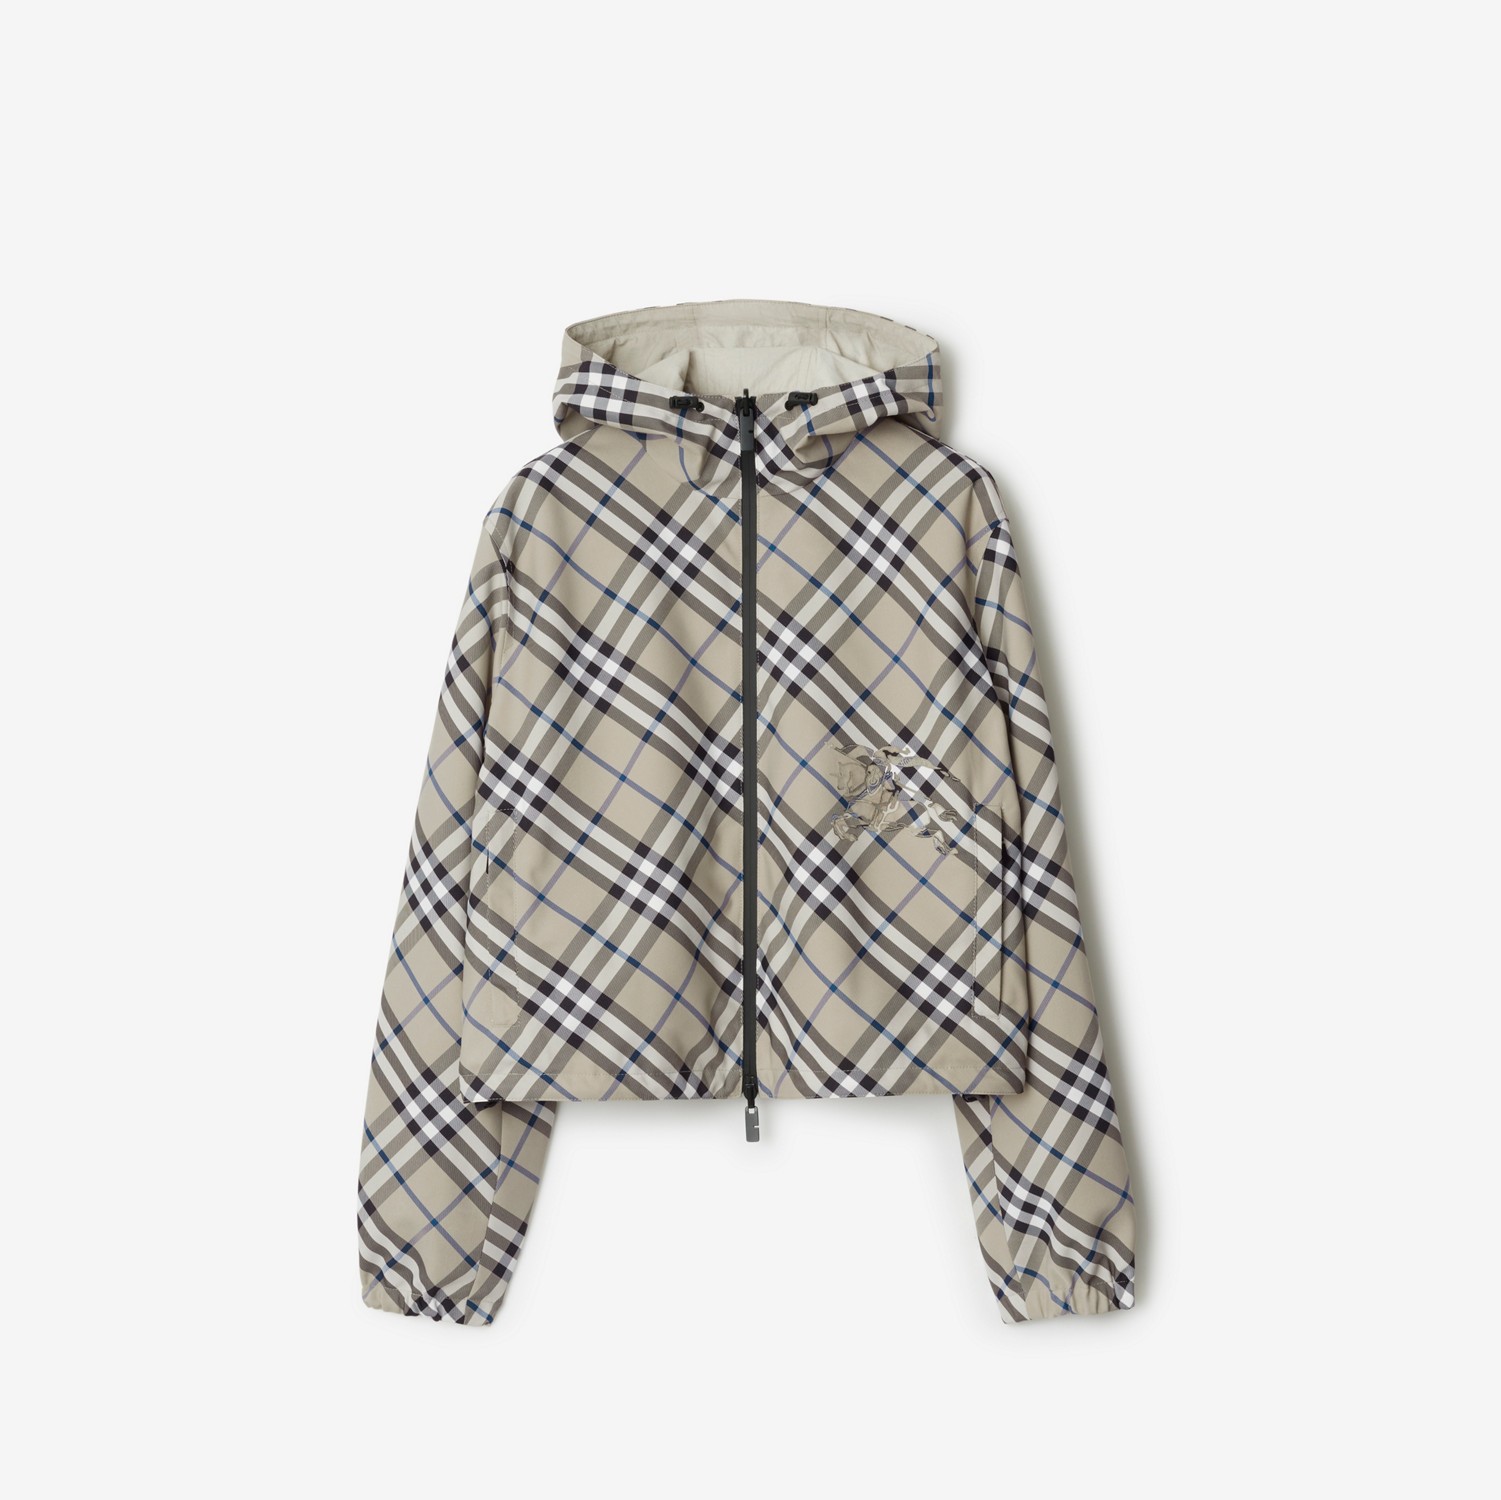 Wendbare Cropped-Jacke in Check